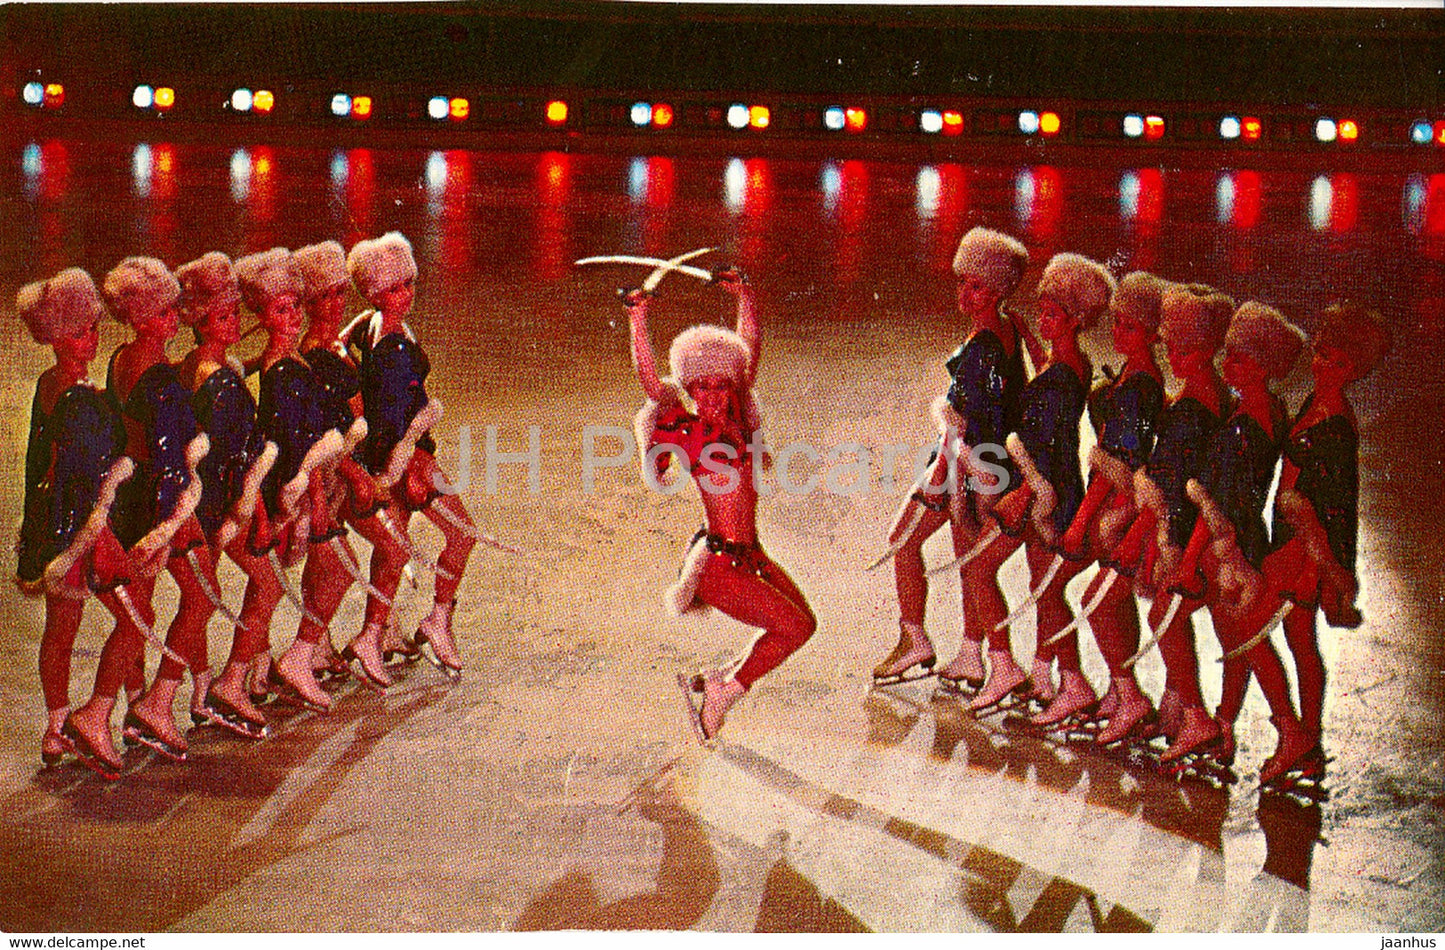 Moscow Ballet on Ice - Sword dance - figure skating - 1971 - Russia USSR - unused - JH Postcards